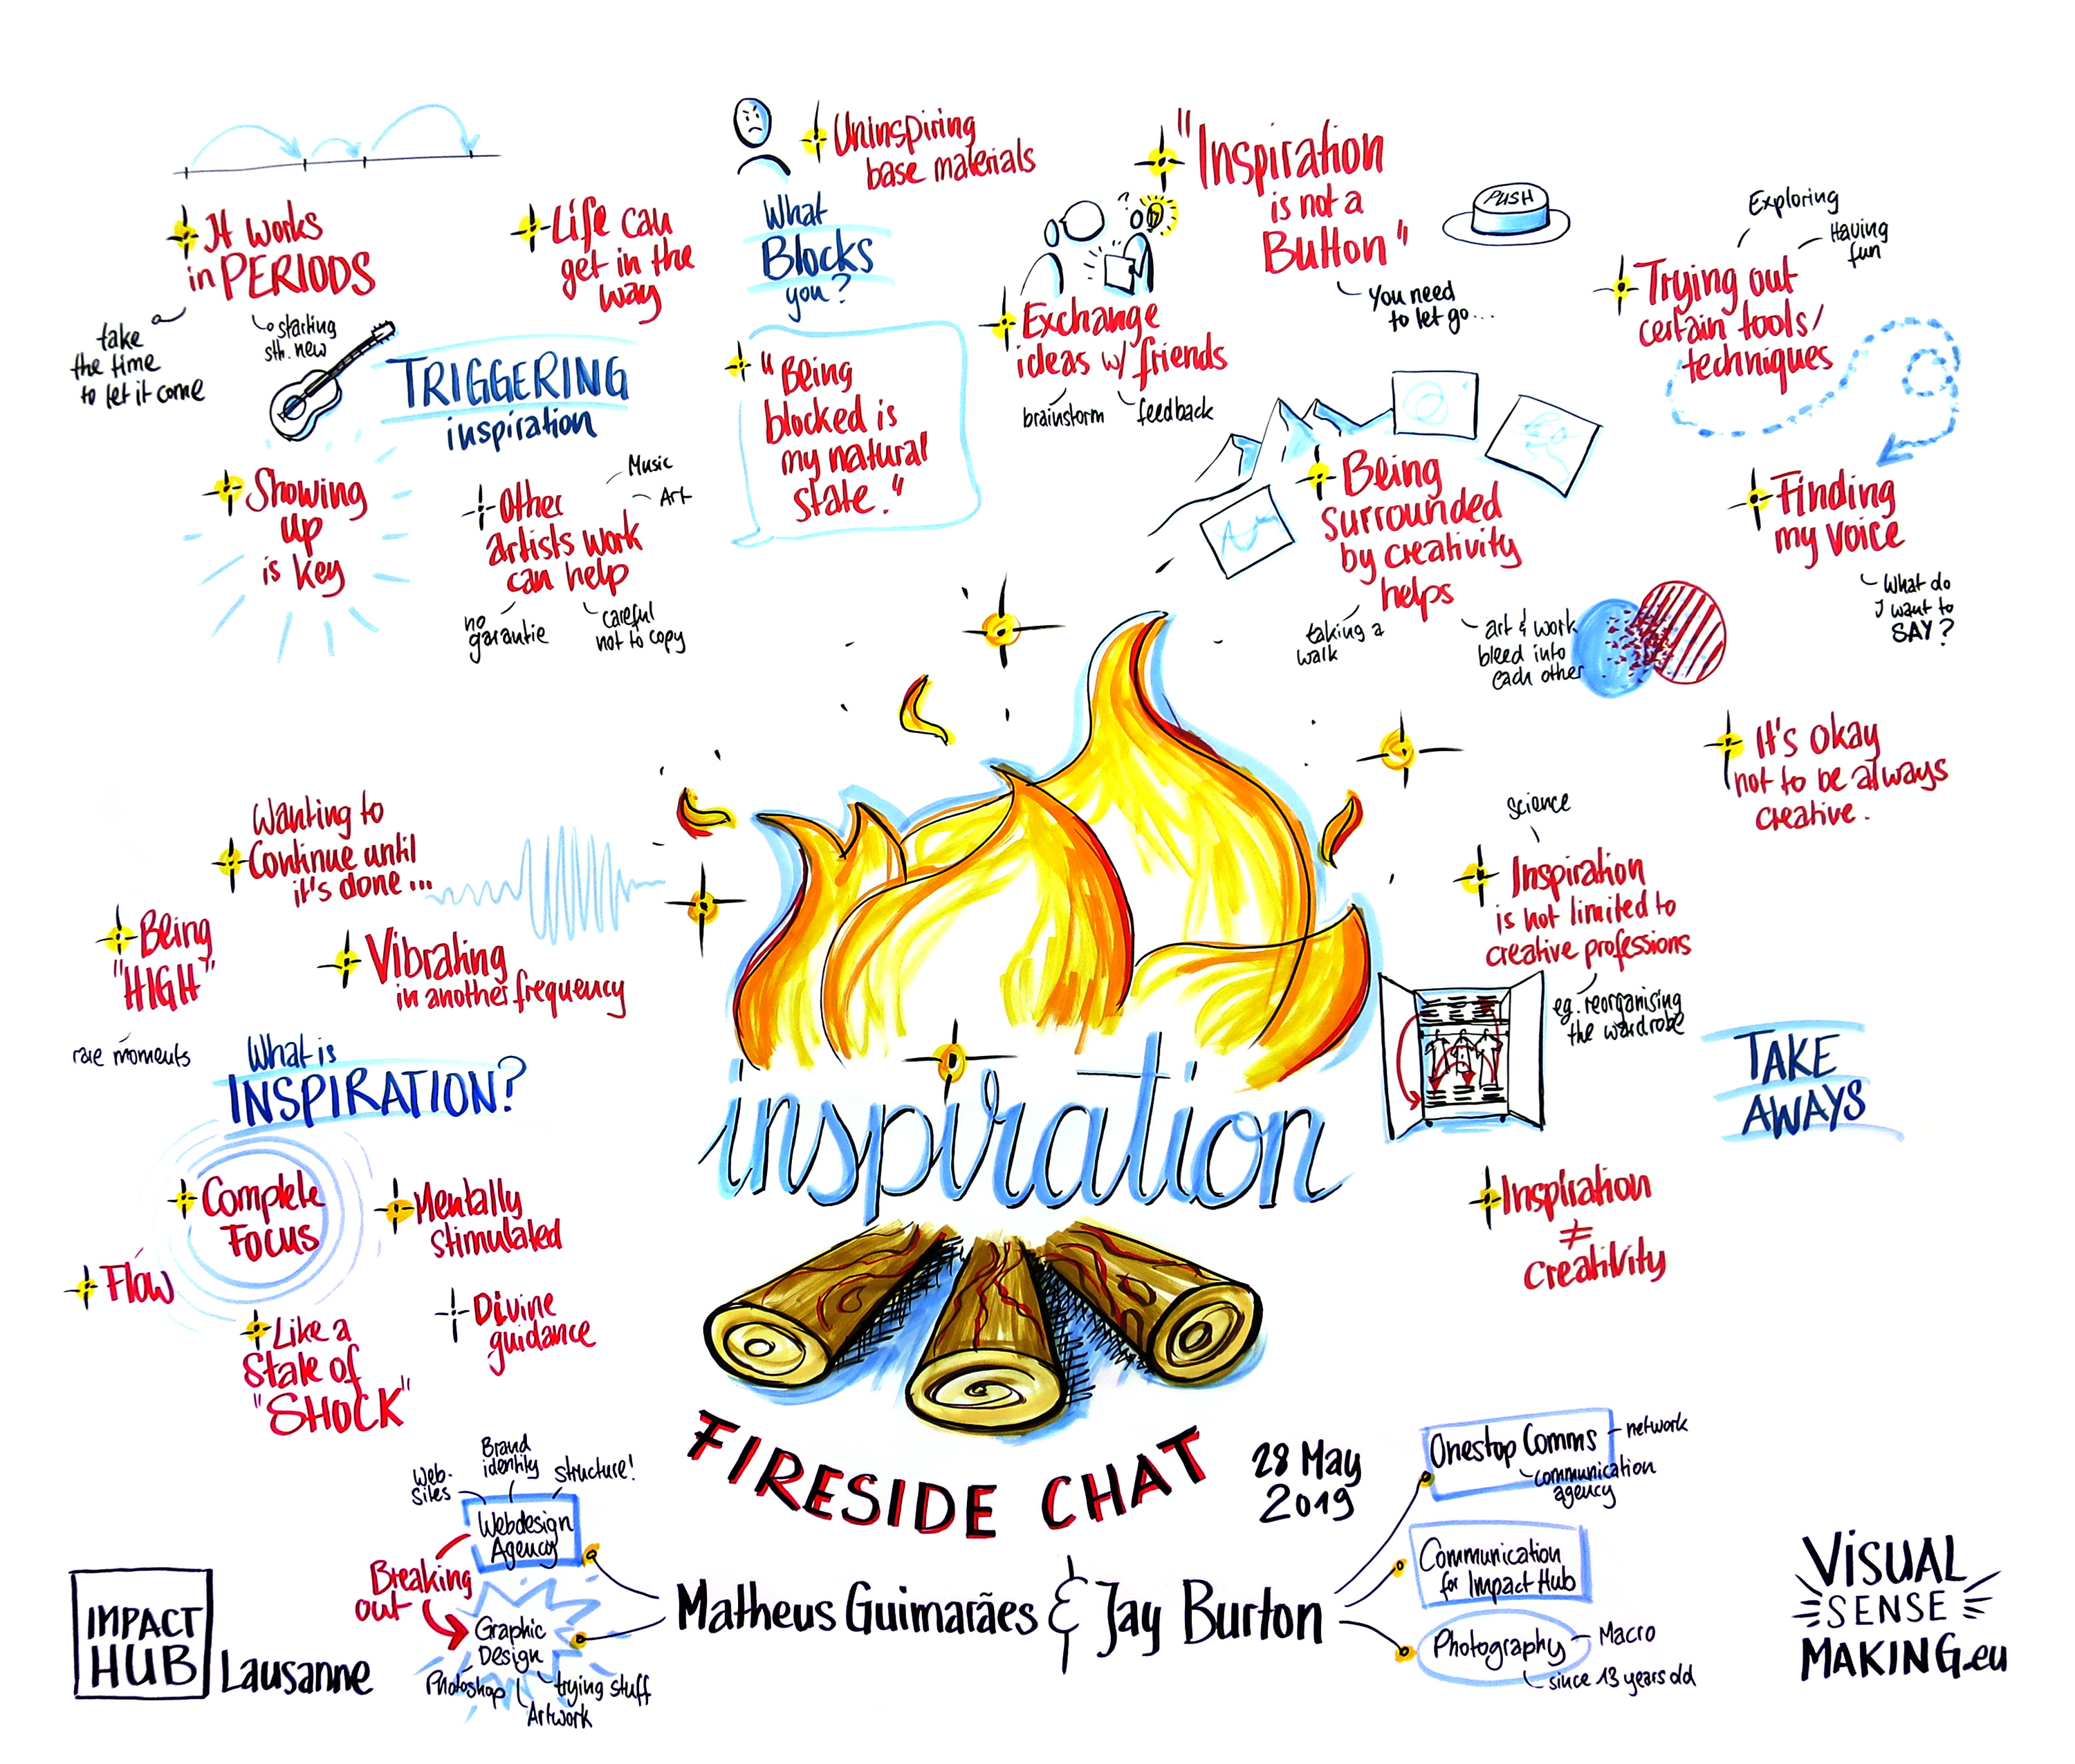 Graphic recording summarizing the conversation of the Fireside Chat on 'Inspiration'